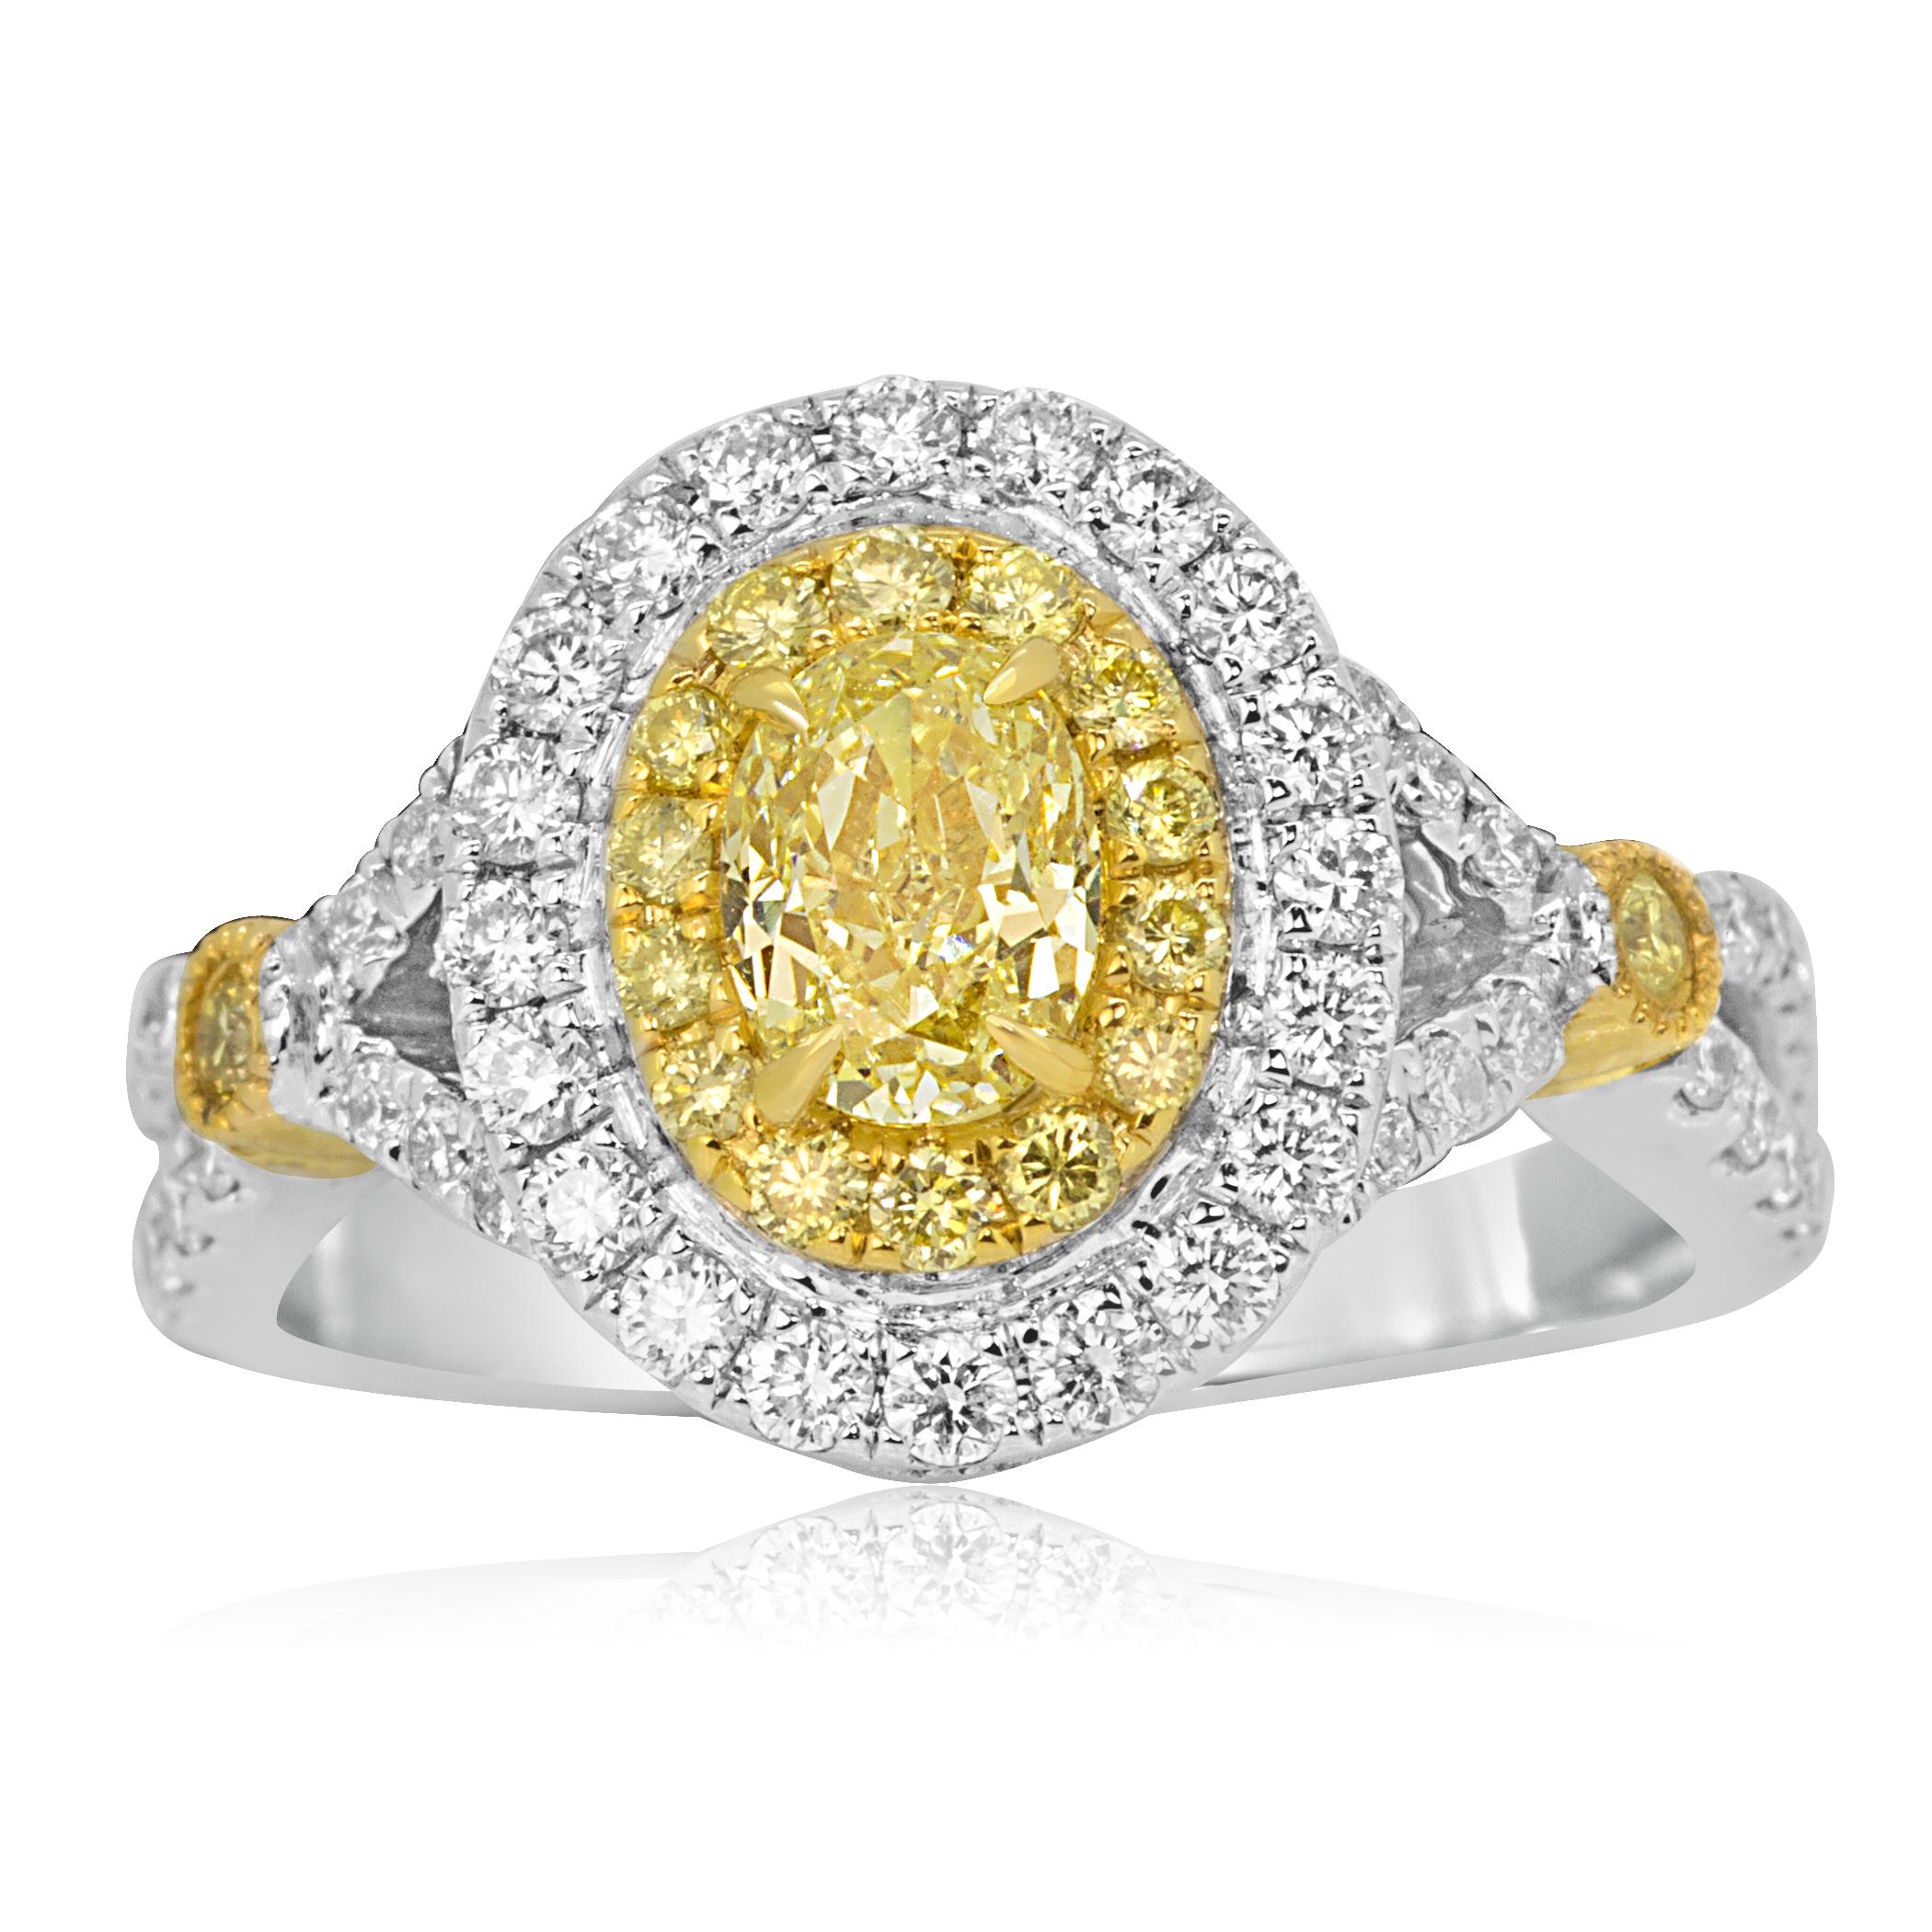 Natural Fancy yellow Diamond Oval 0.73 Carat Encircled in Double Halo of Natural Fancy Yellow Round Diamonds 0.22 Carat and White Round Diamonds 0.68 Carat in Stunning and Classic 18K White and Yellow Gold Bridal Or Fashion Ring.

Style available in